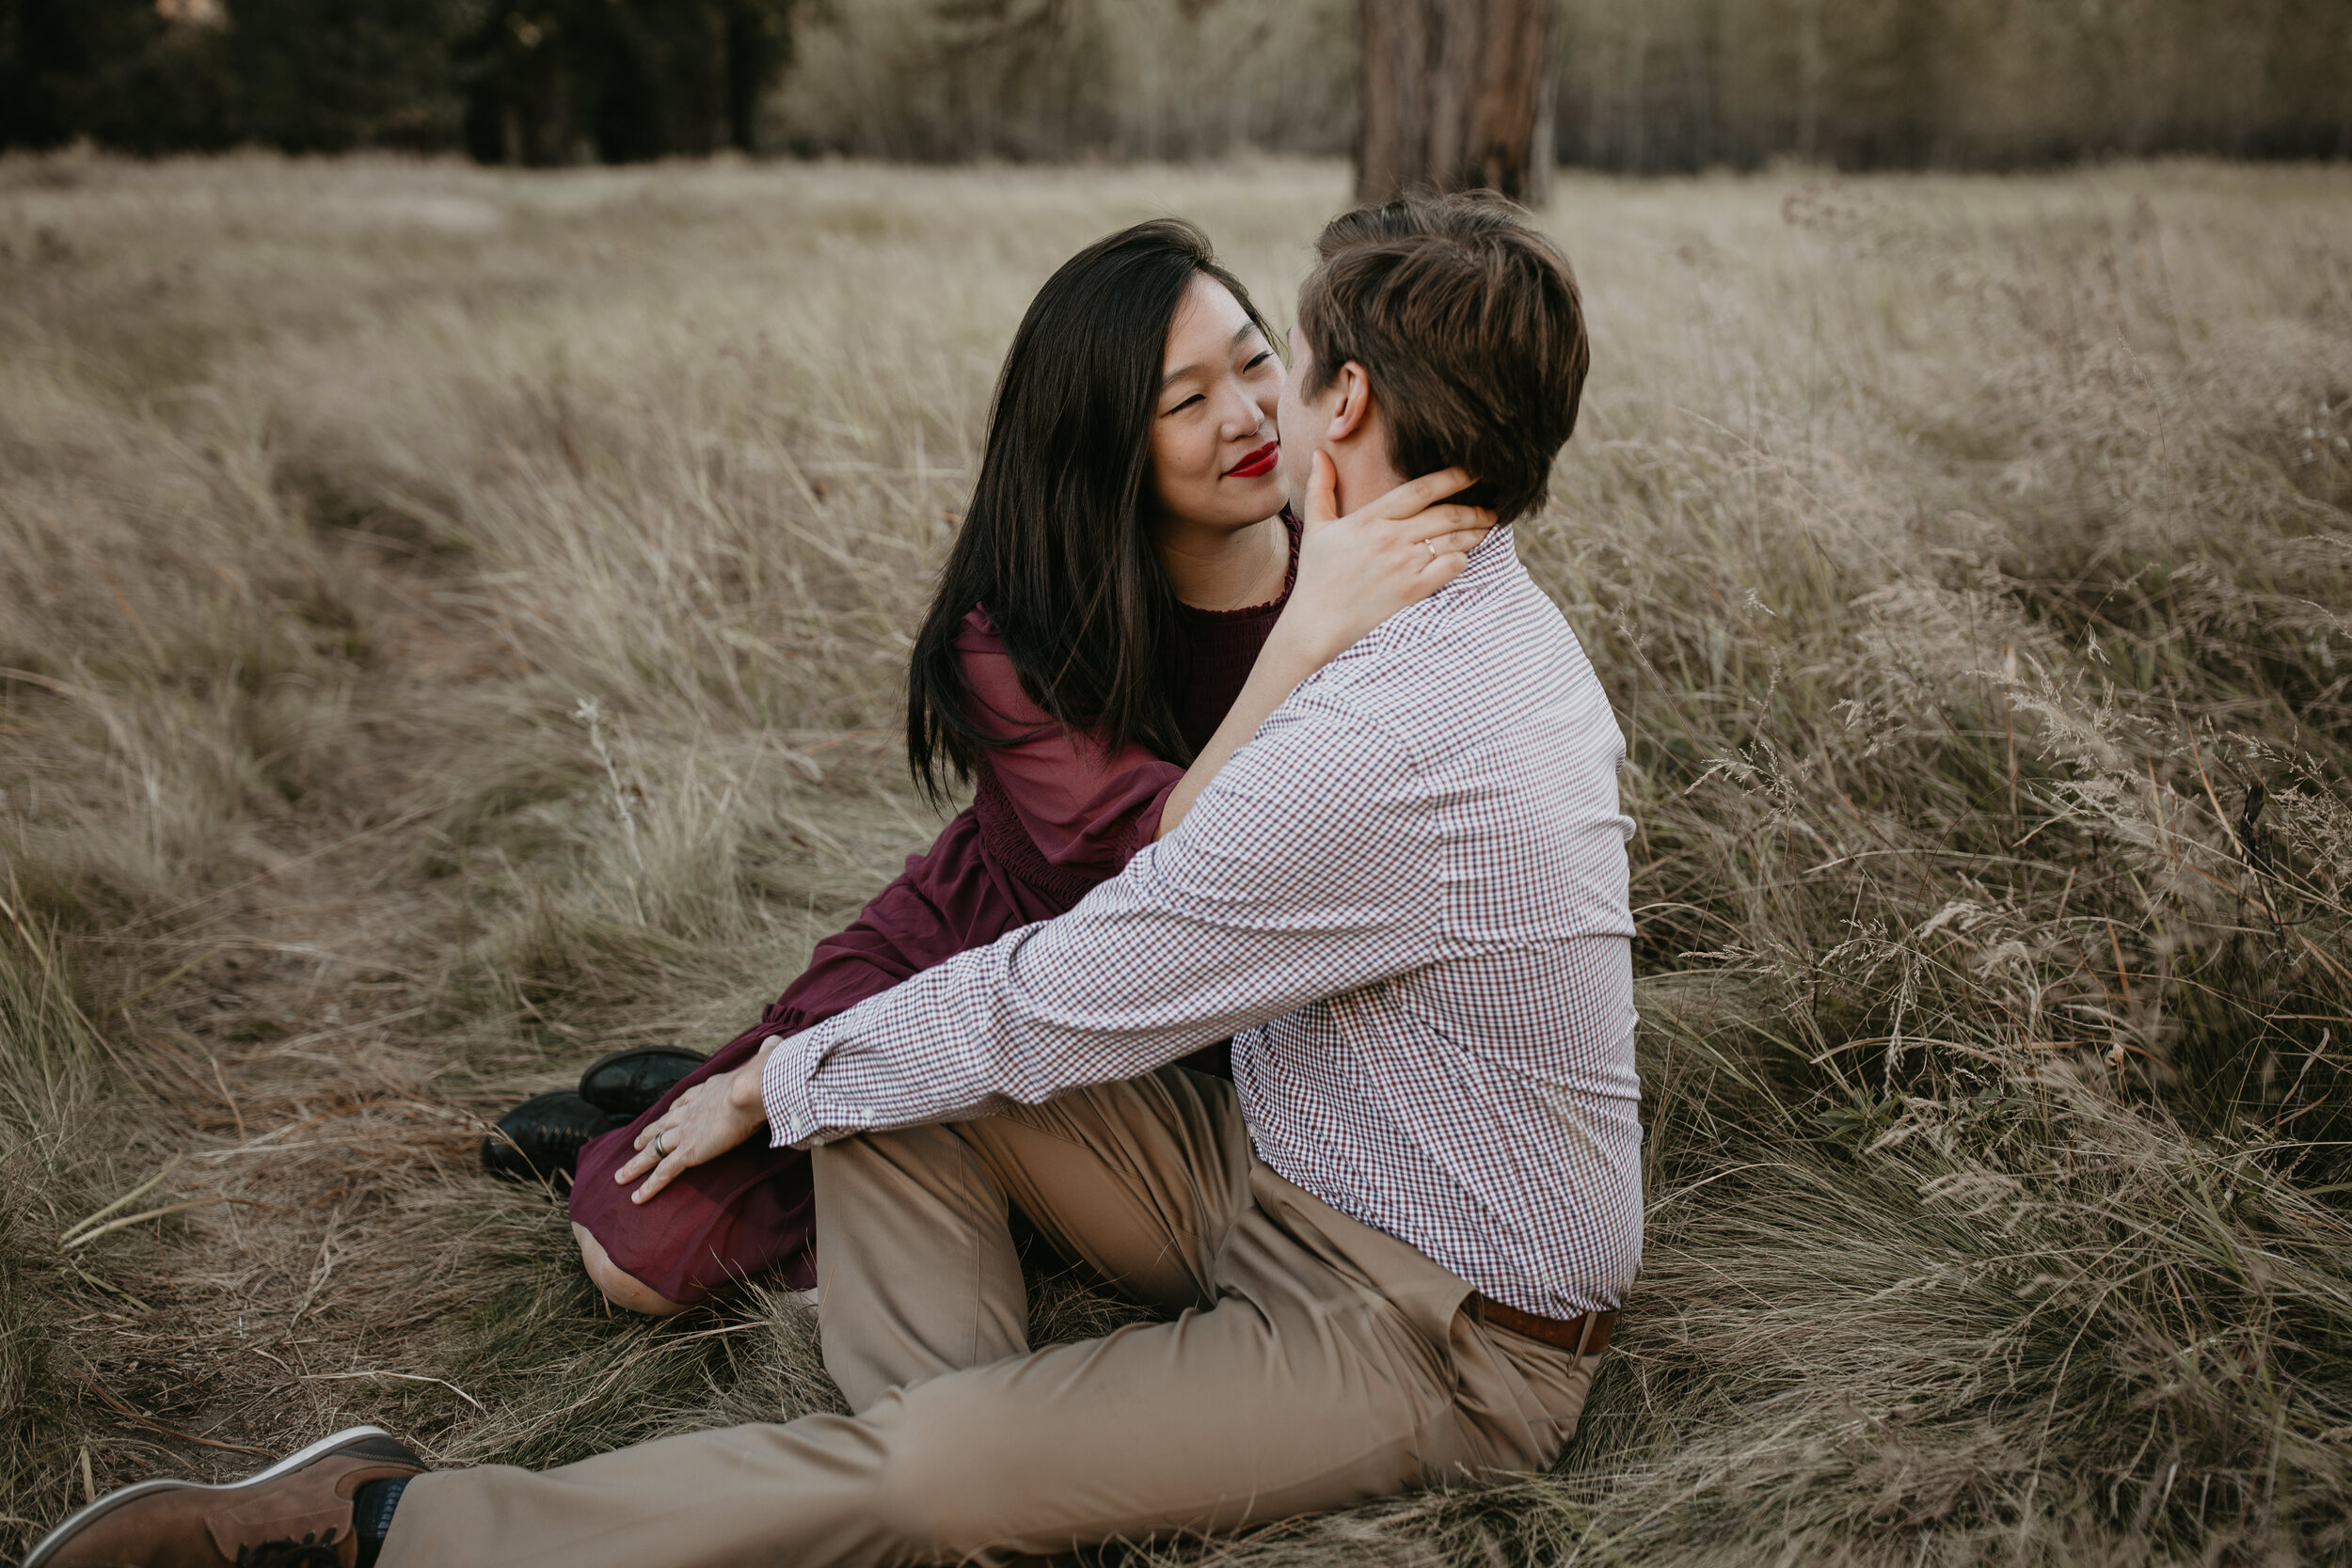 yosemite-national-park-couples-session-at-taft-point-and-yosemite-valley-yosemite-elopement-photographer-nicole-daacke-photography-111.jpg